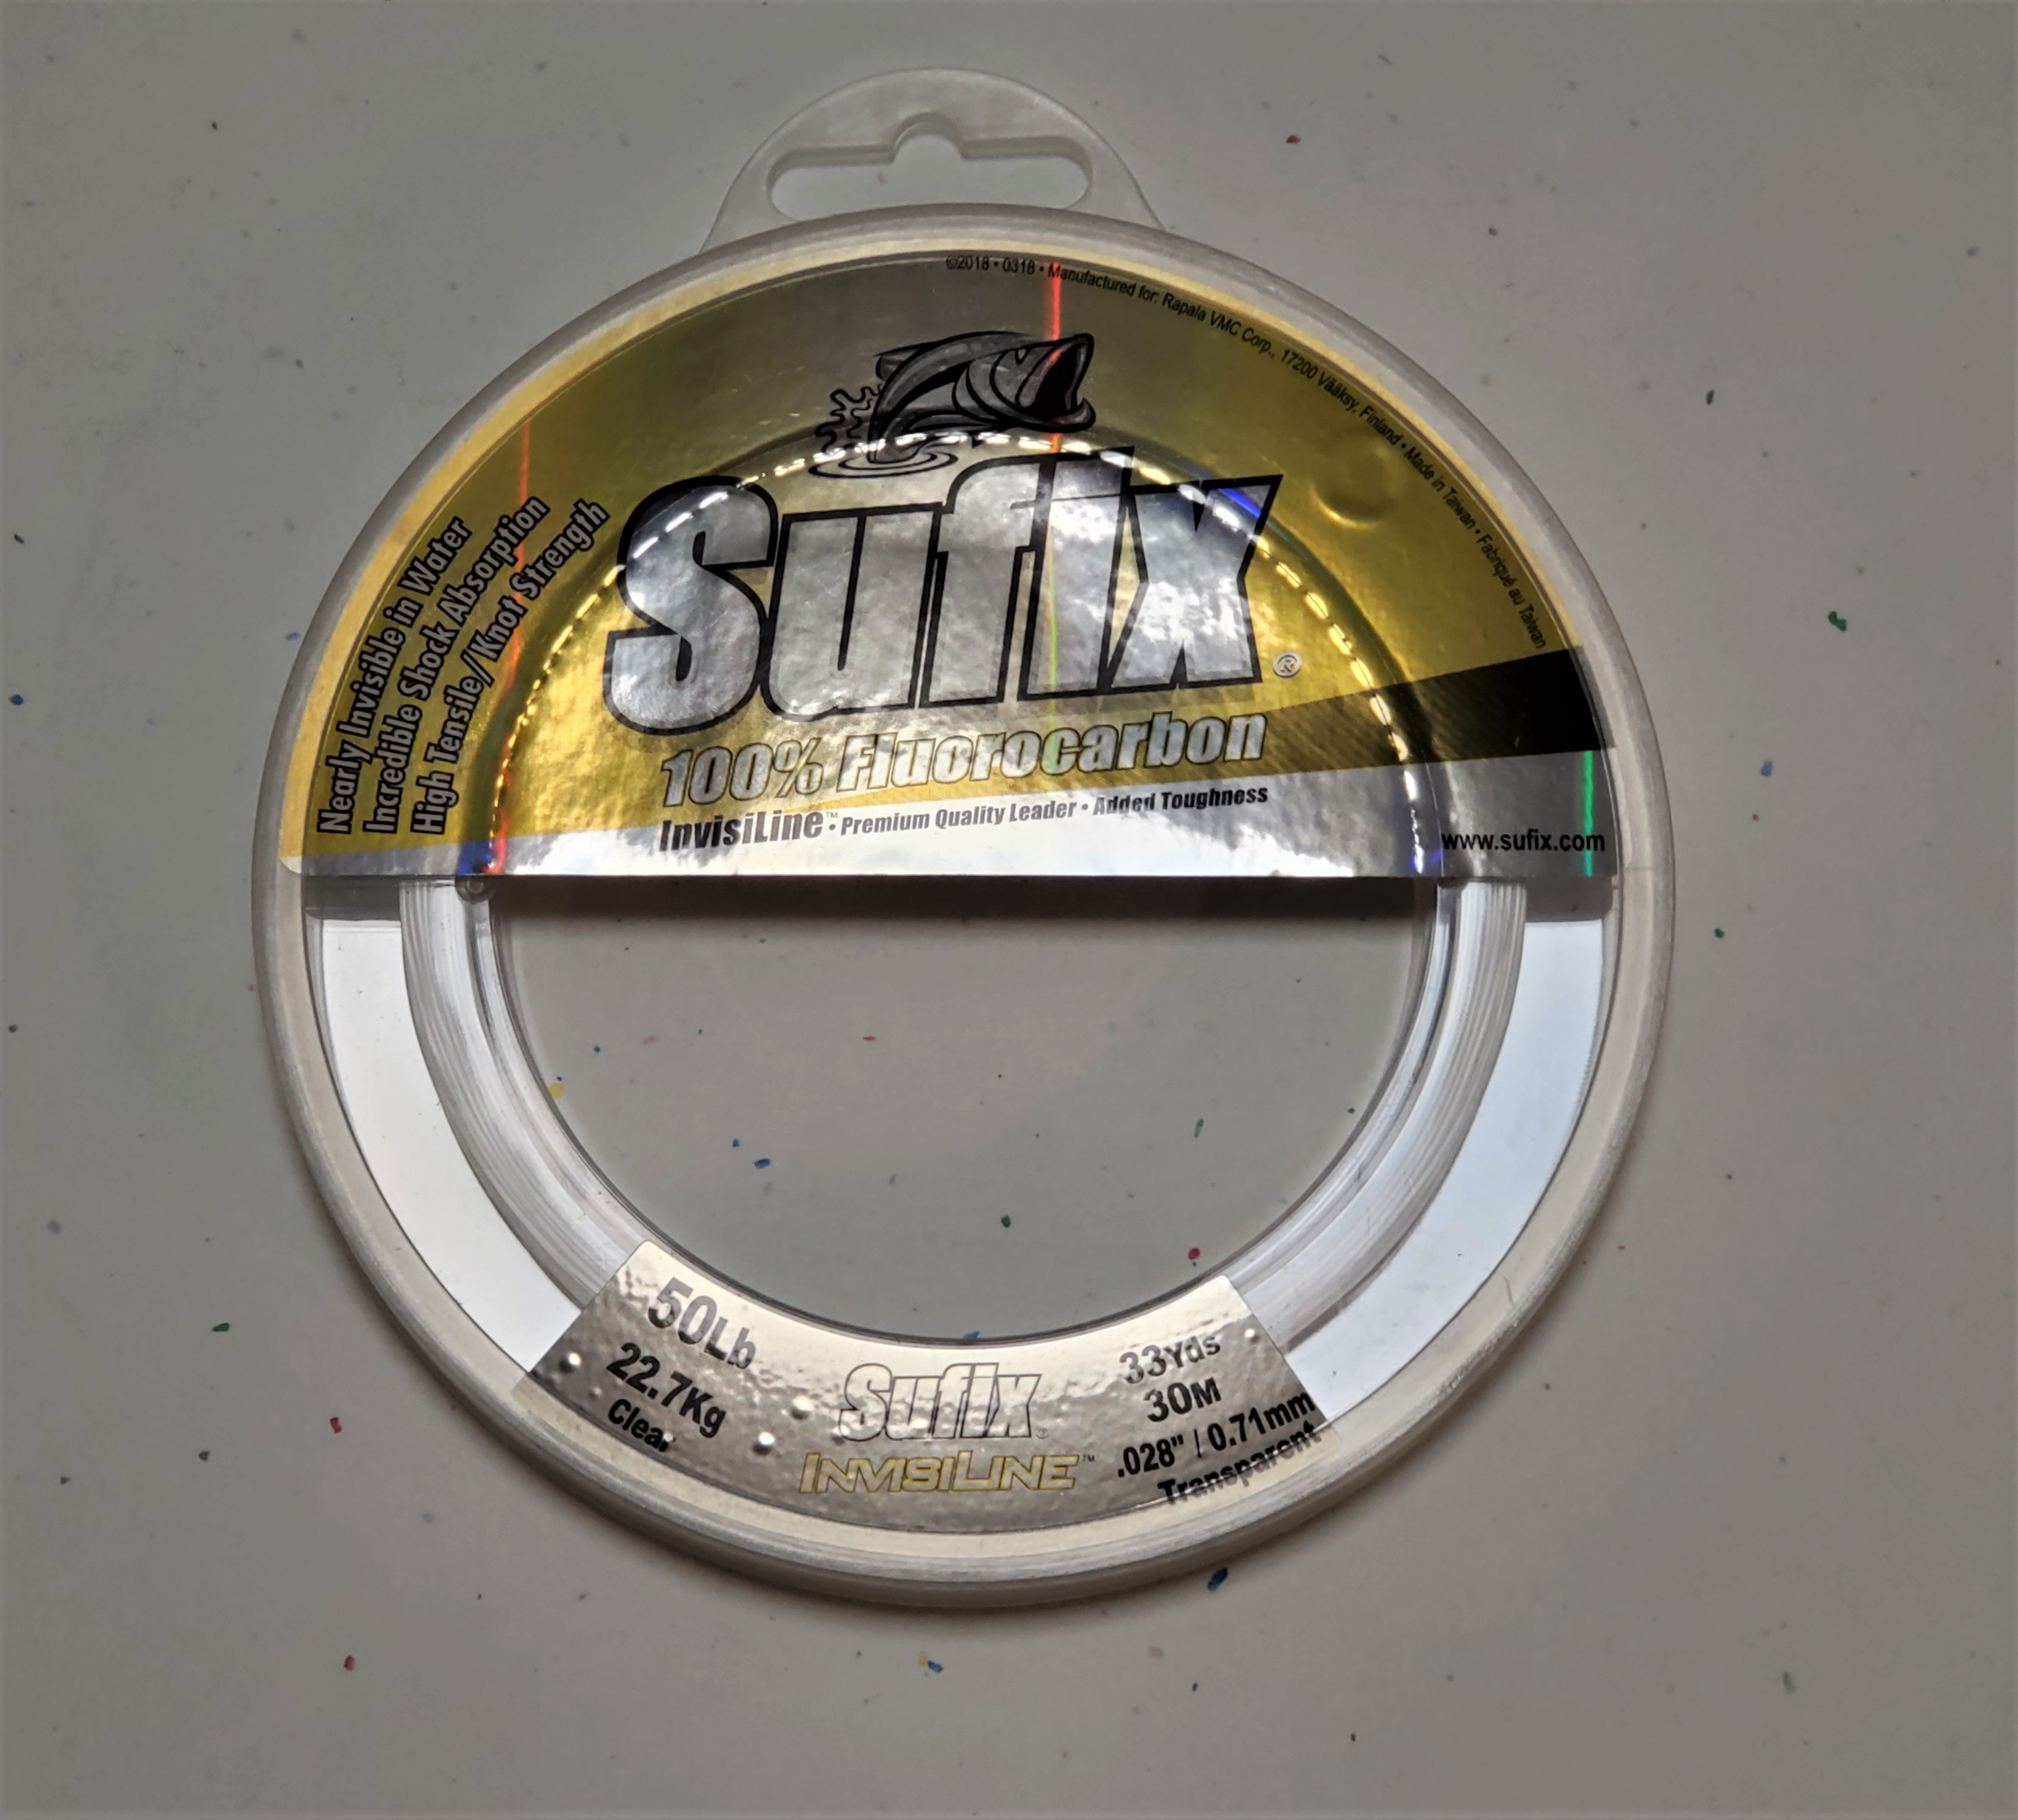 Sufix Invisiline Fluorocarbon Leader - 50lb 33yd - Hawaii Nearshore Fishing